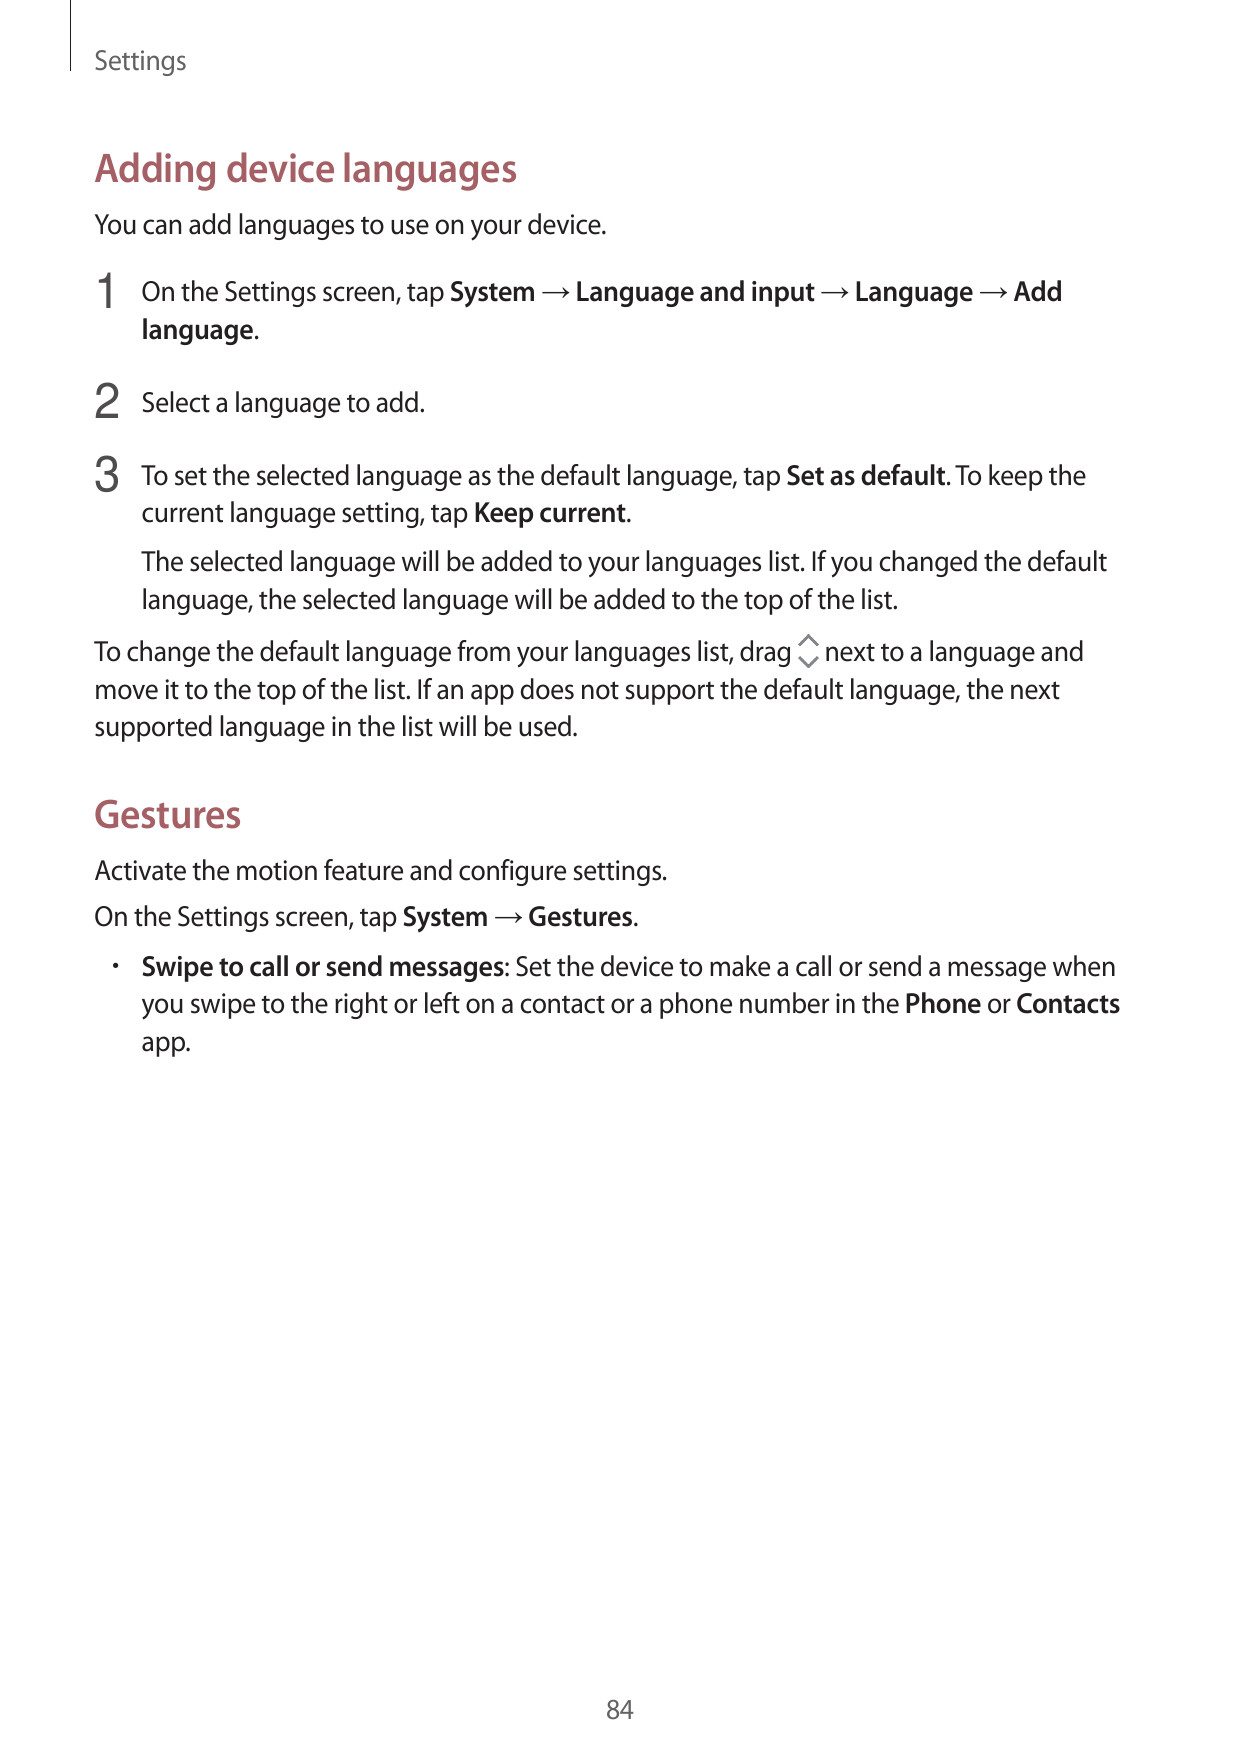 SettingsAdding device languagesYou can add languages to use on your device.1 On the Settings screen, tap System → Language and i